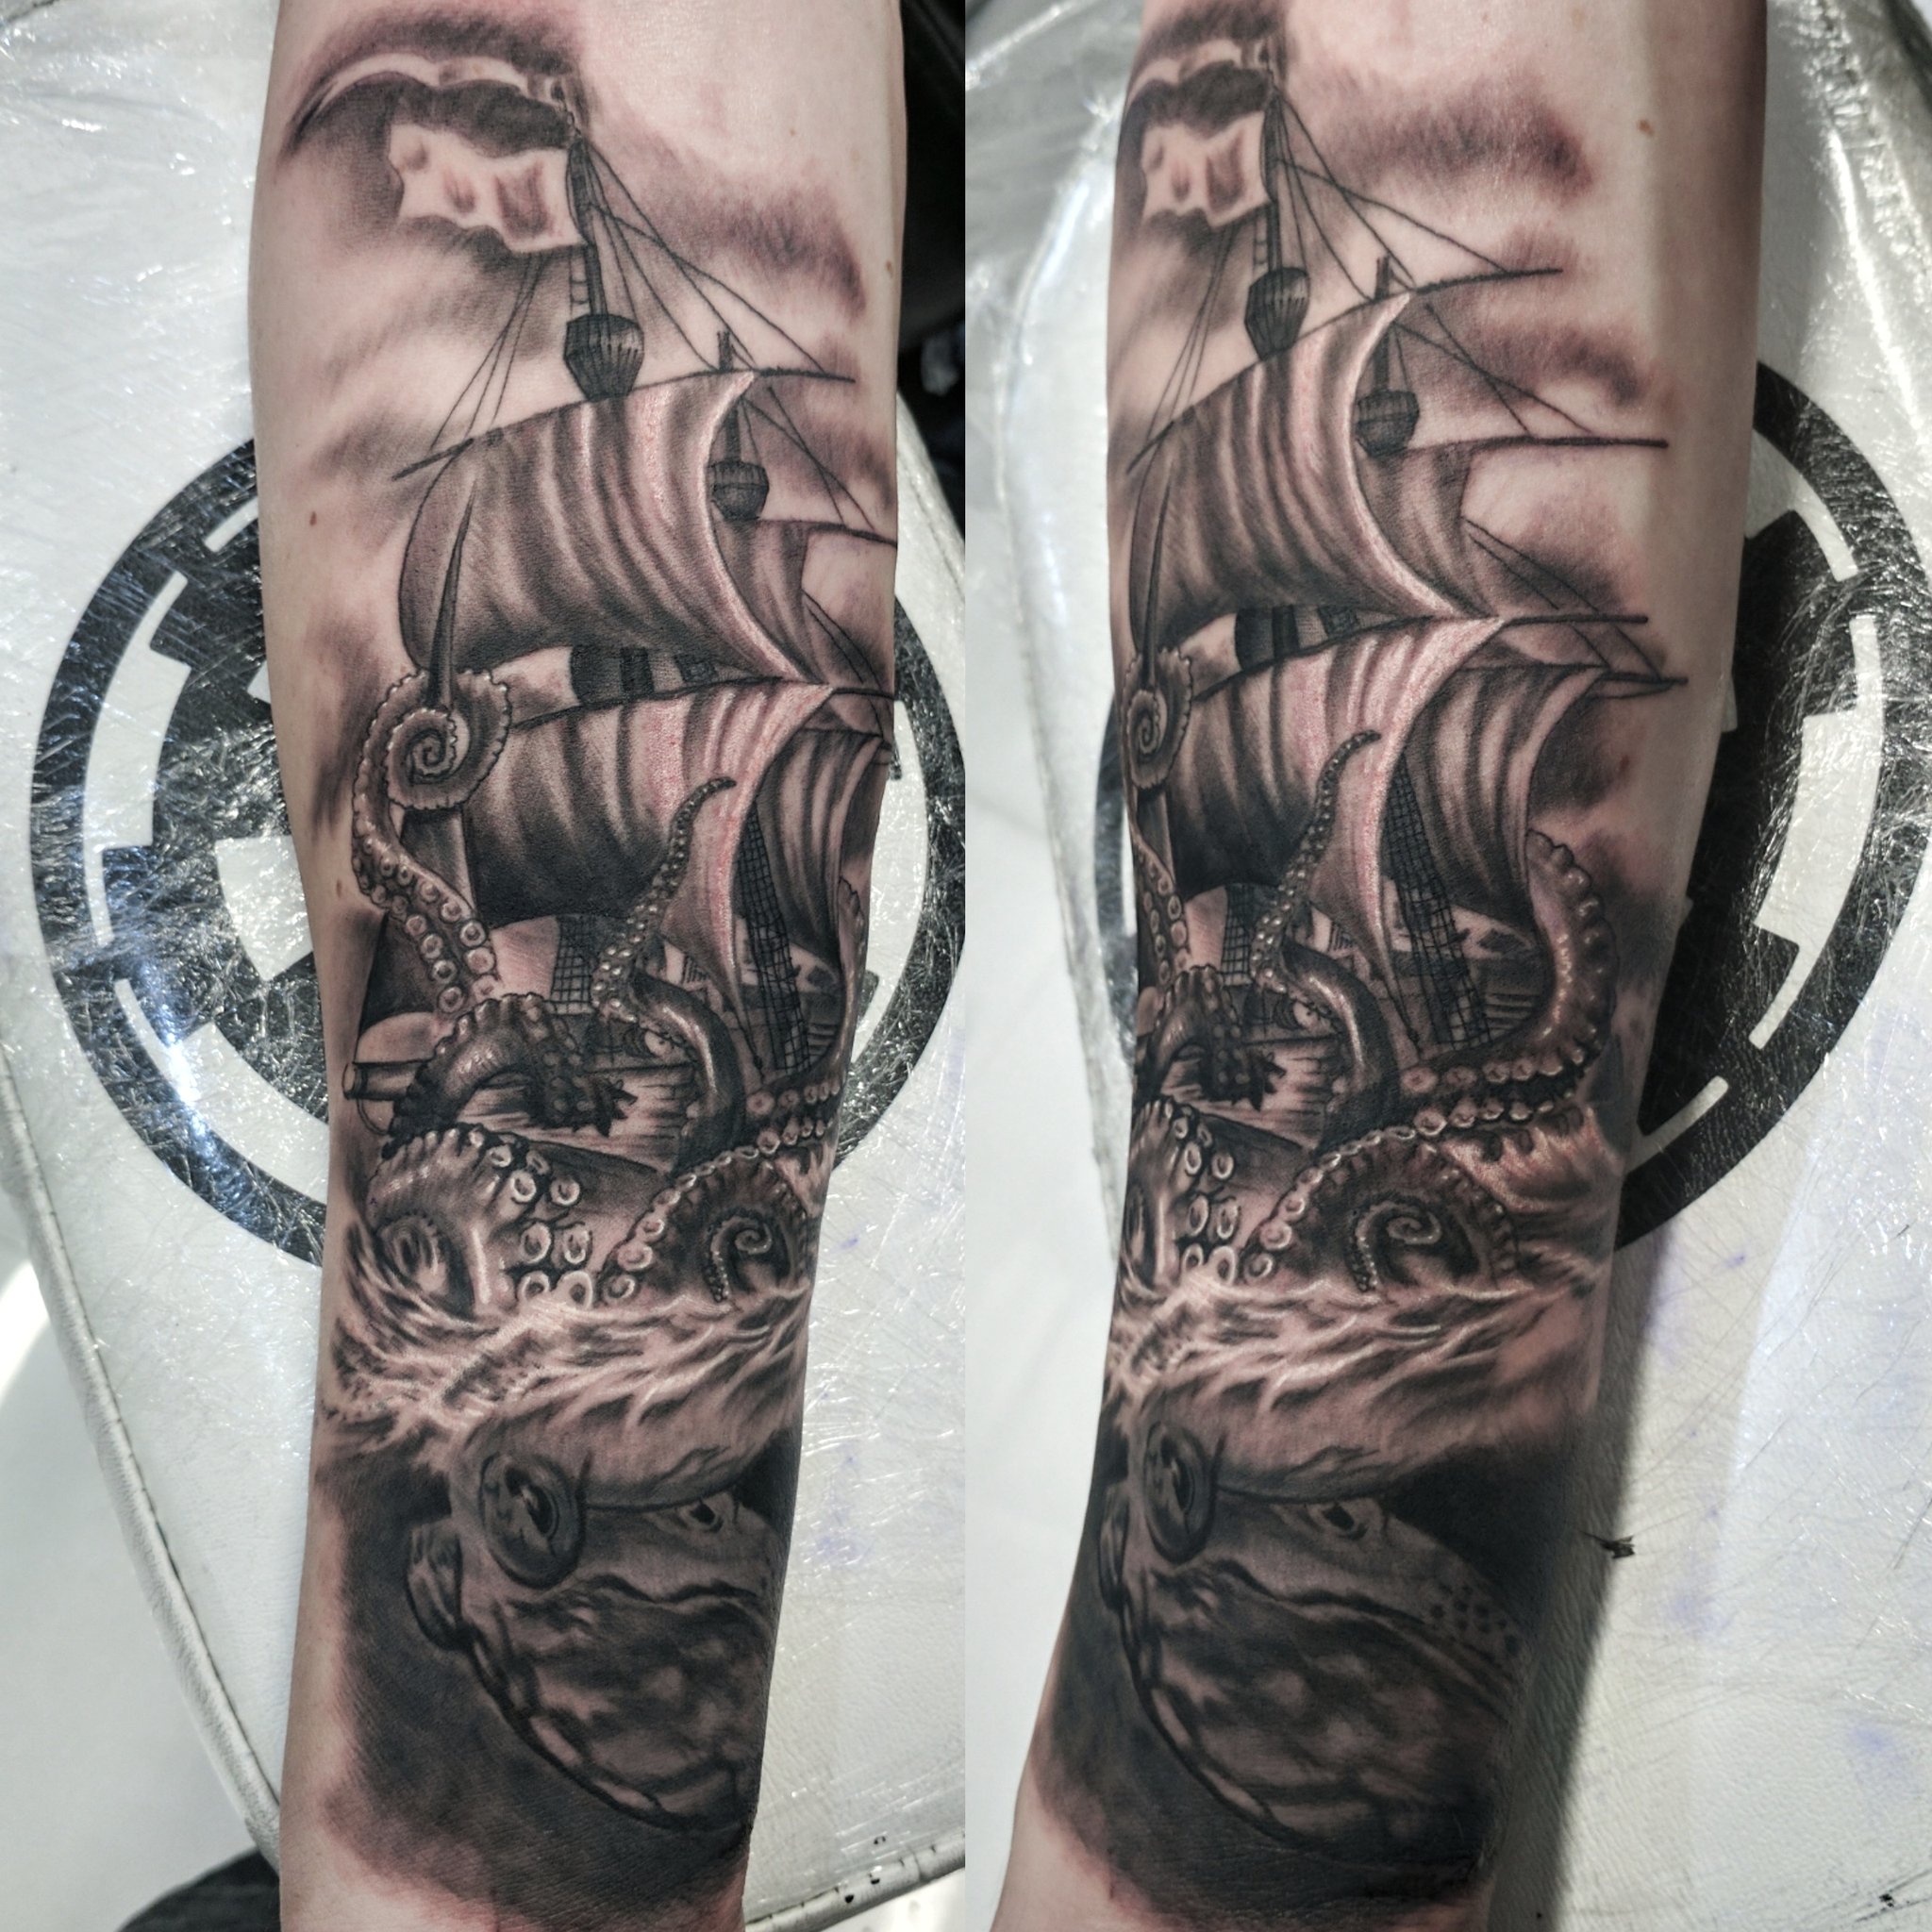 Starlight Tattoo  Checkout this healed kraken and clipper ship done by  jaysalltattoo Big thanks to Doug for always sitting like a champ and for  stopping back in for the photo kraken 